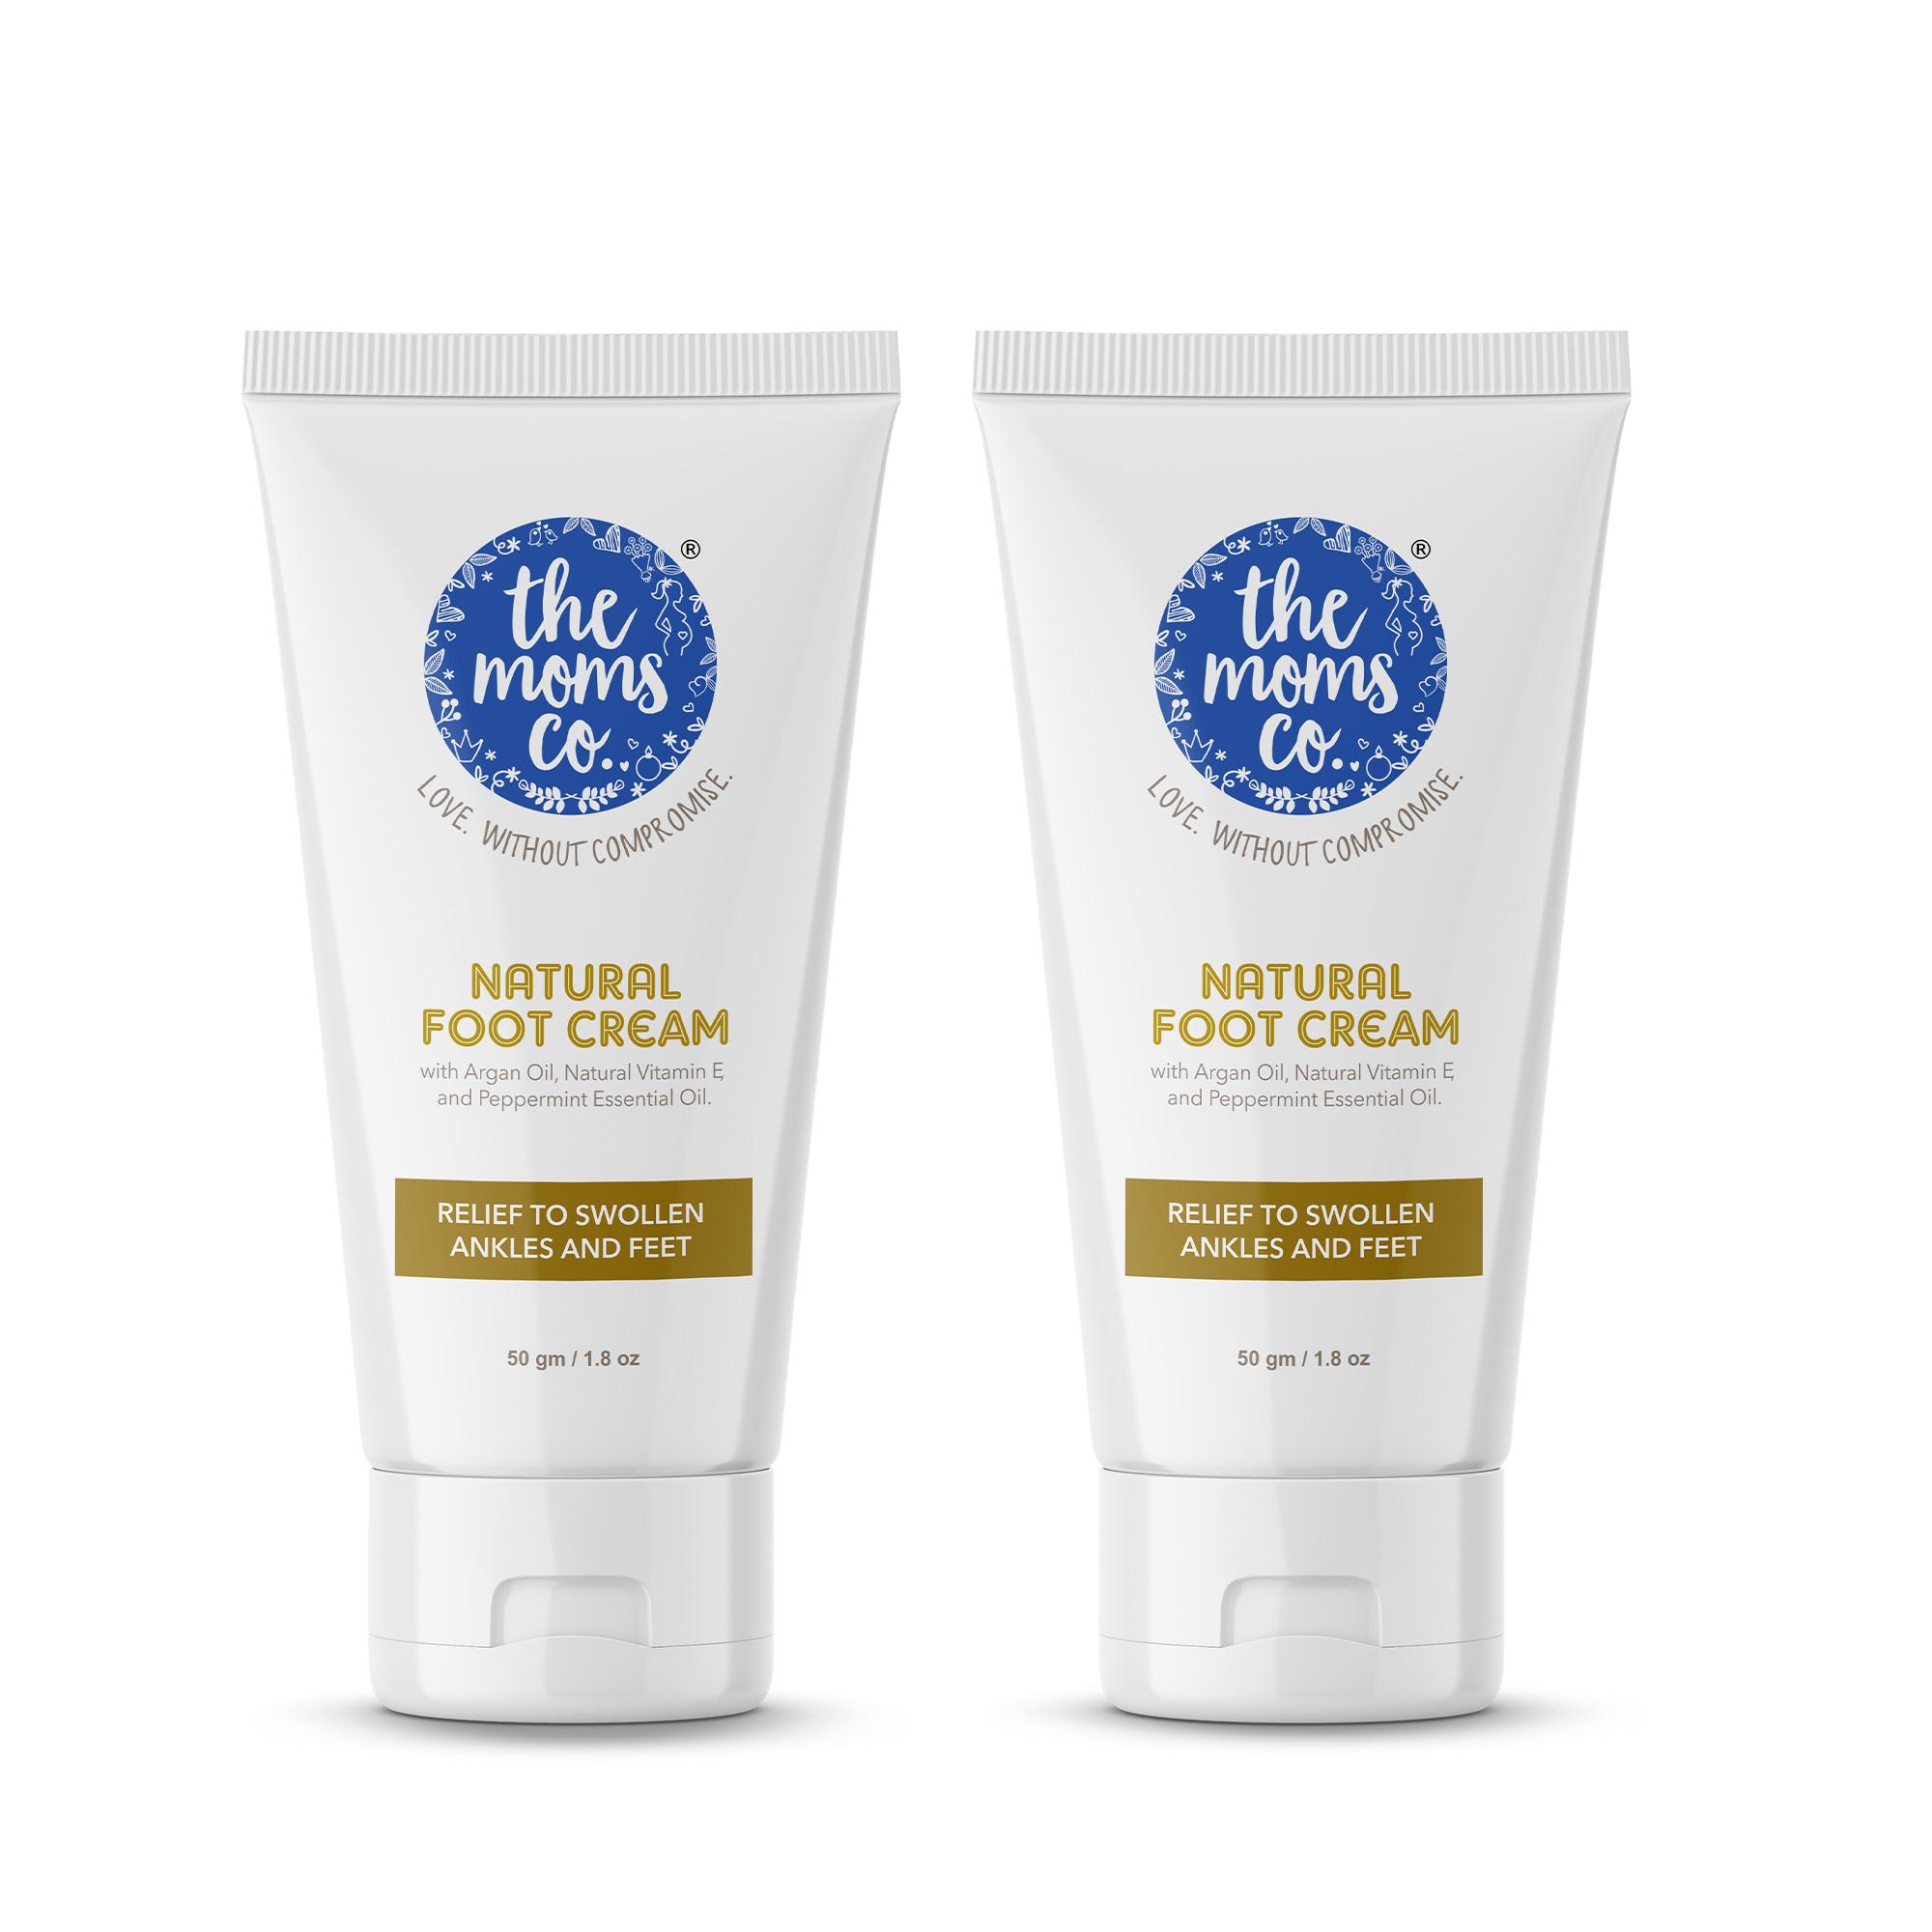 The Mom's Co. | The Mom's Co. Natural Foot Cream With Argan Oil Vit E & Oil Relief (50 g) Combo